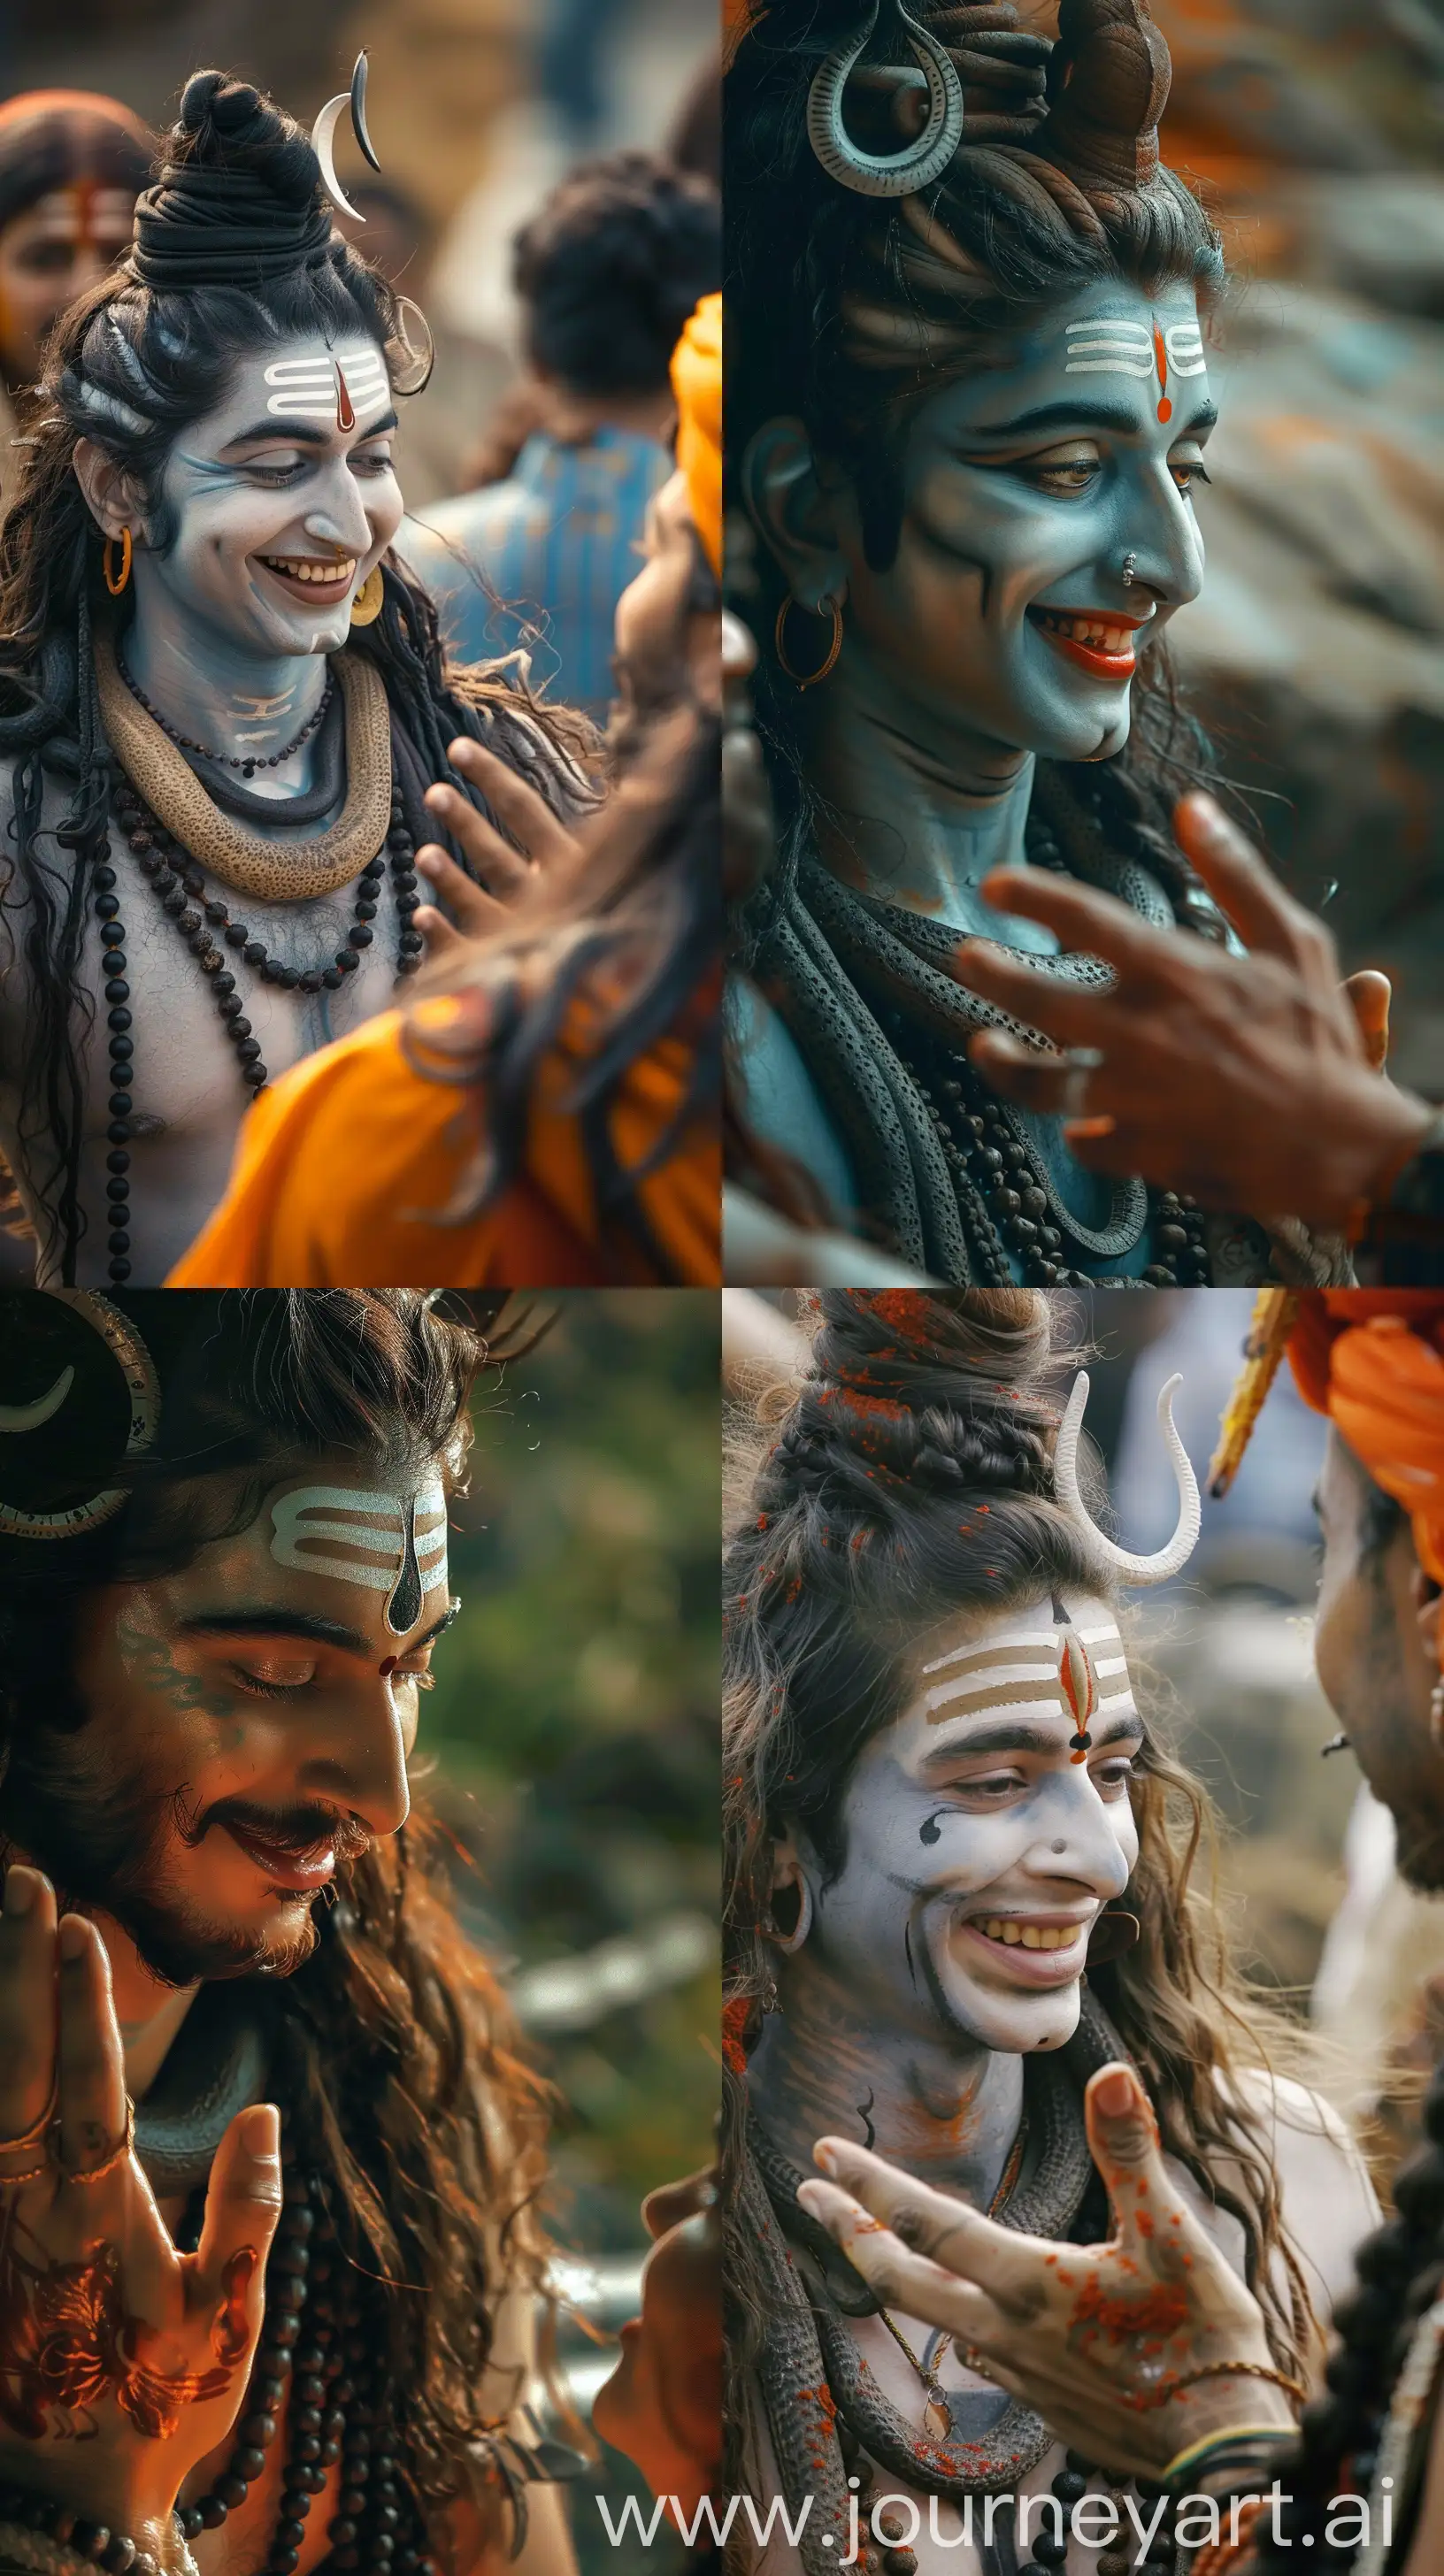 lord shiva seen talking with someone with a smile on his face, hand gestures, close up image, --s 100 --ar 9:16 --v 6